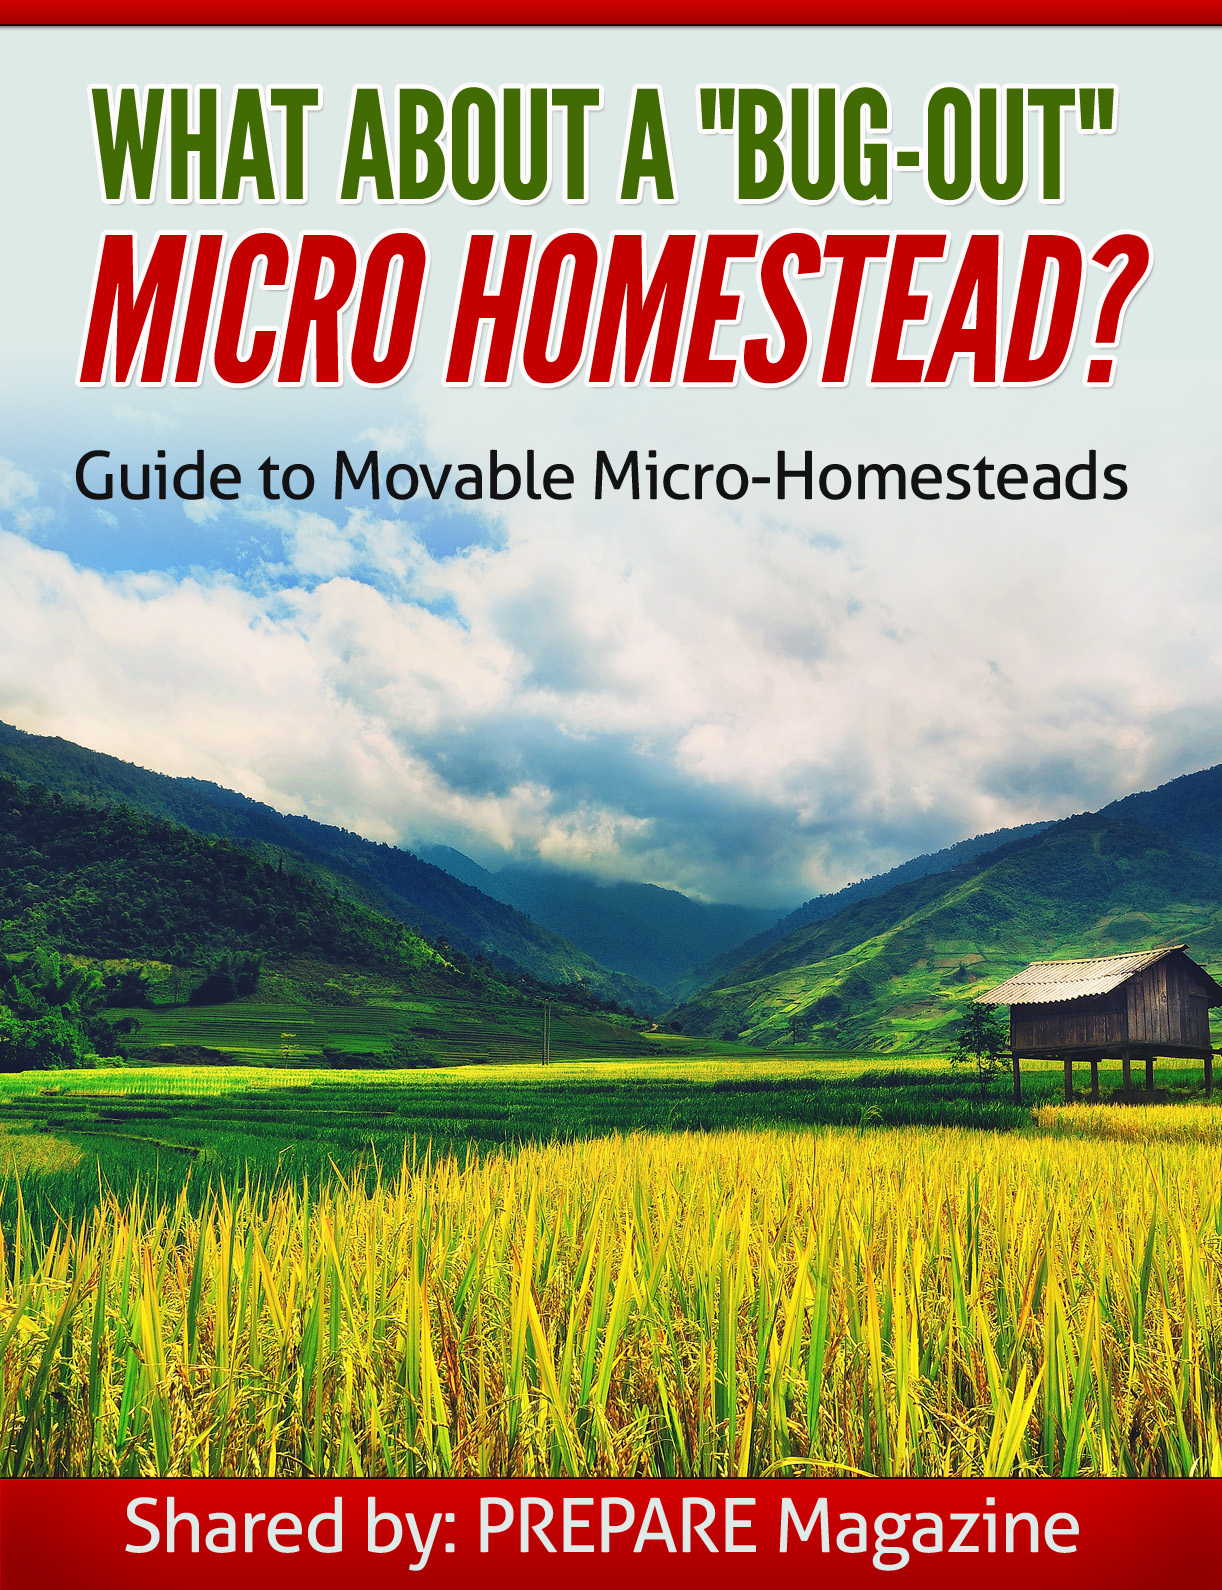 What About a Bug-Out Micro-Homestead?